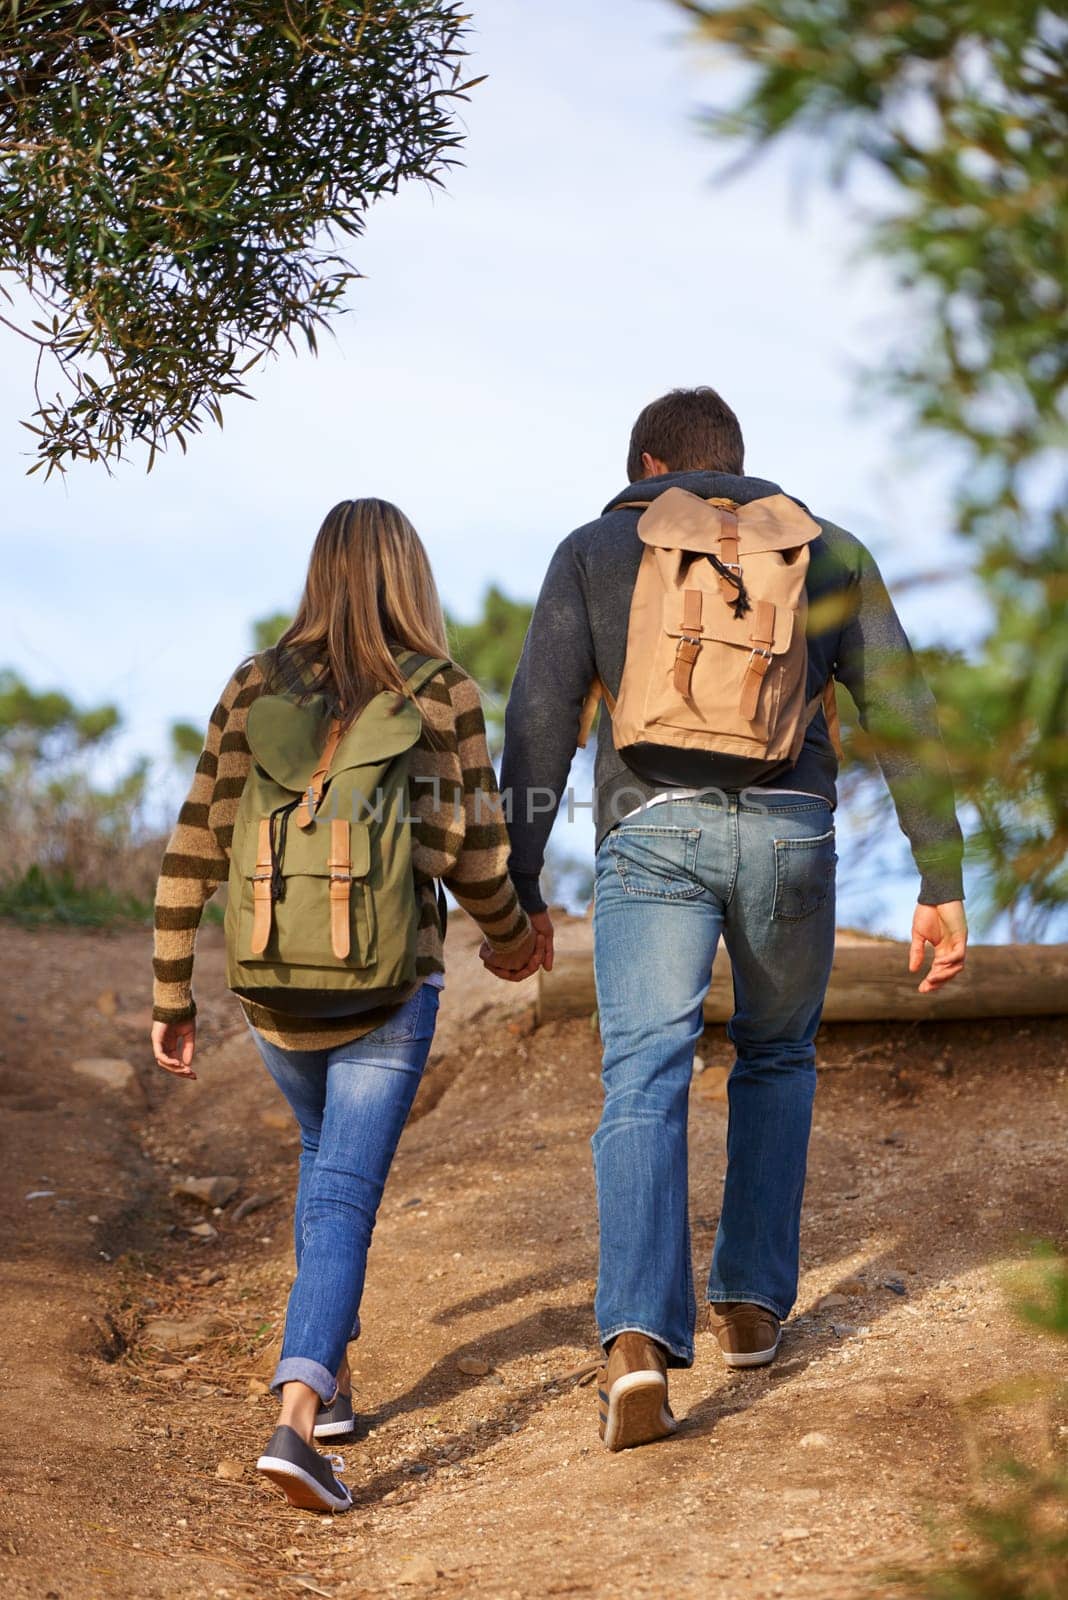 Path, hiking and couple holding hands in nature for holiday, travel or adventure outdoor with backpack. Rear view, man and woman trekking in the countryside on vacation, journey and date together.